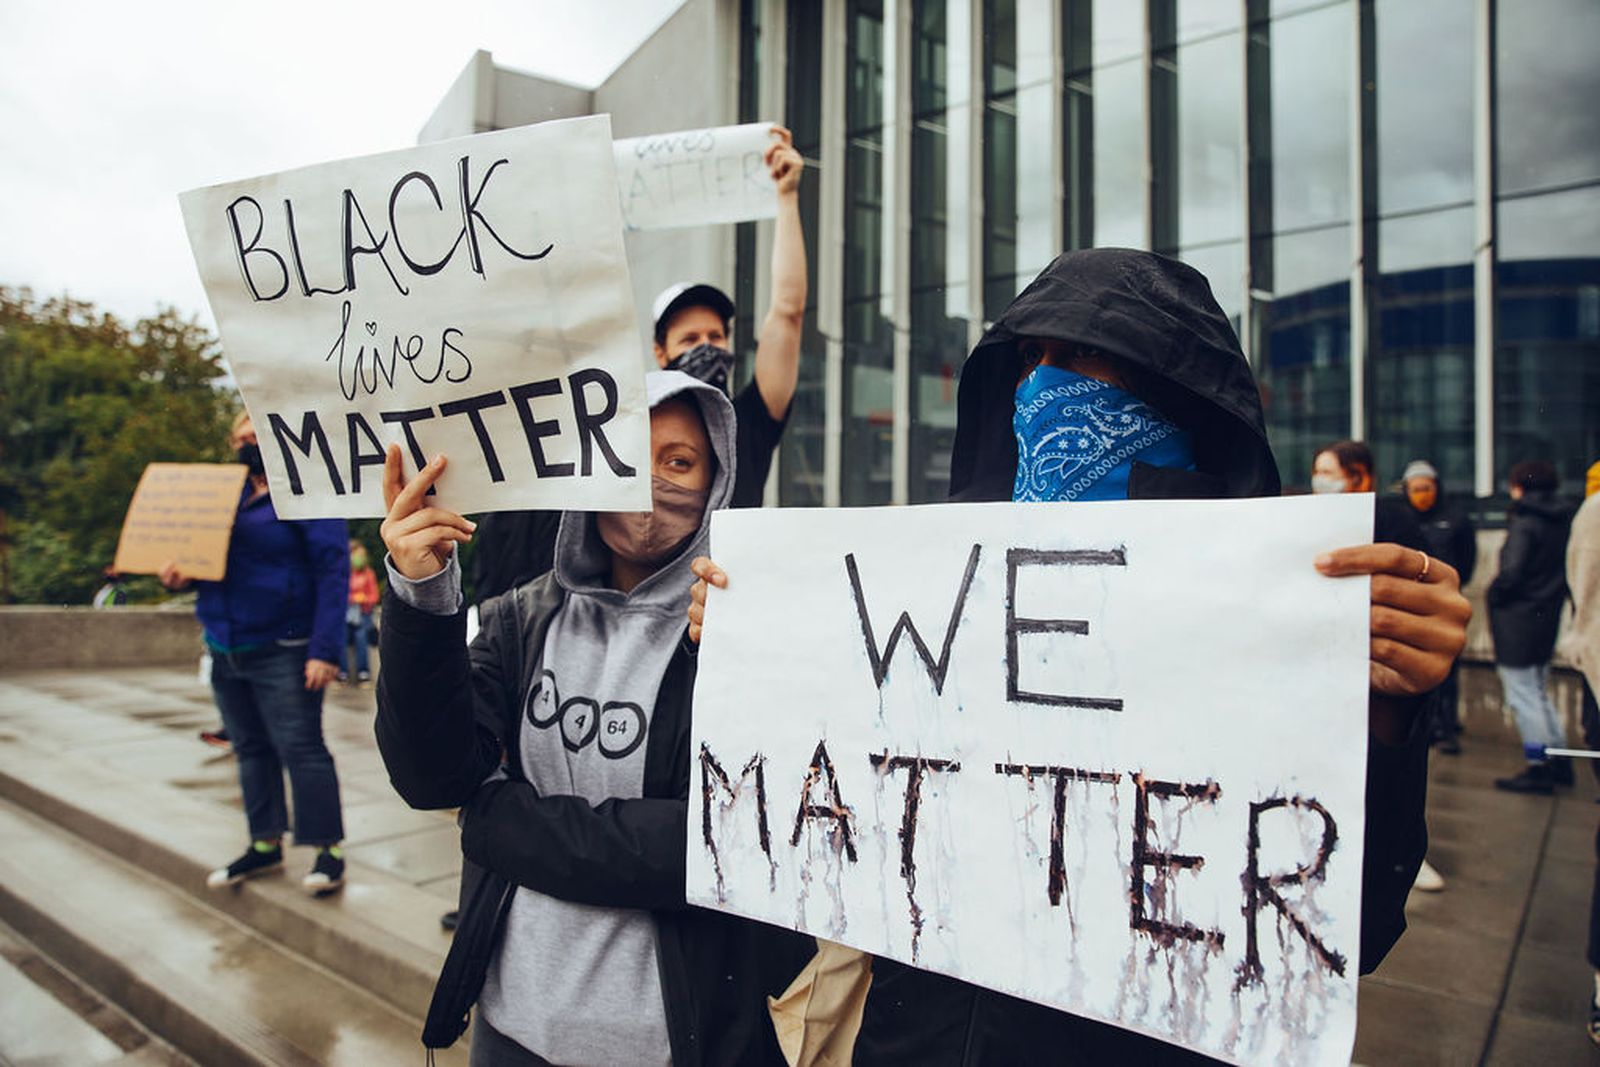 Adidas Employees in Protest for Black Lives Matter